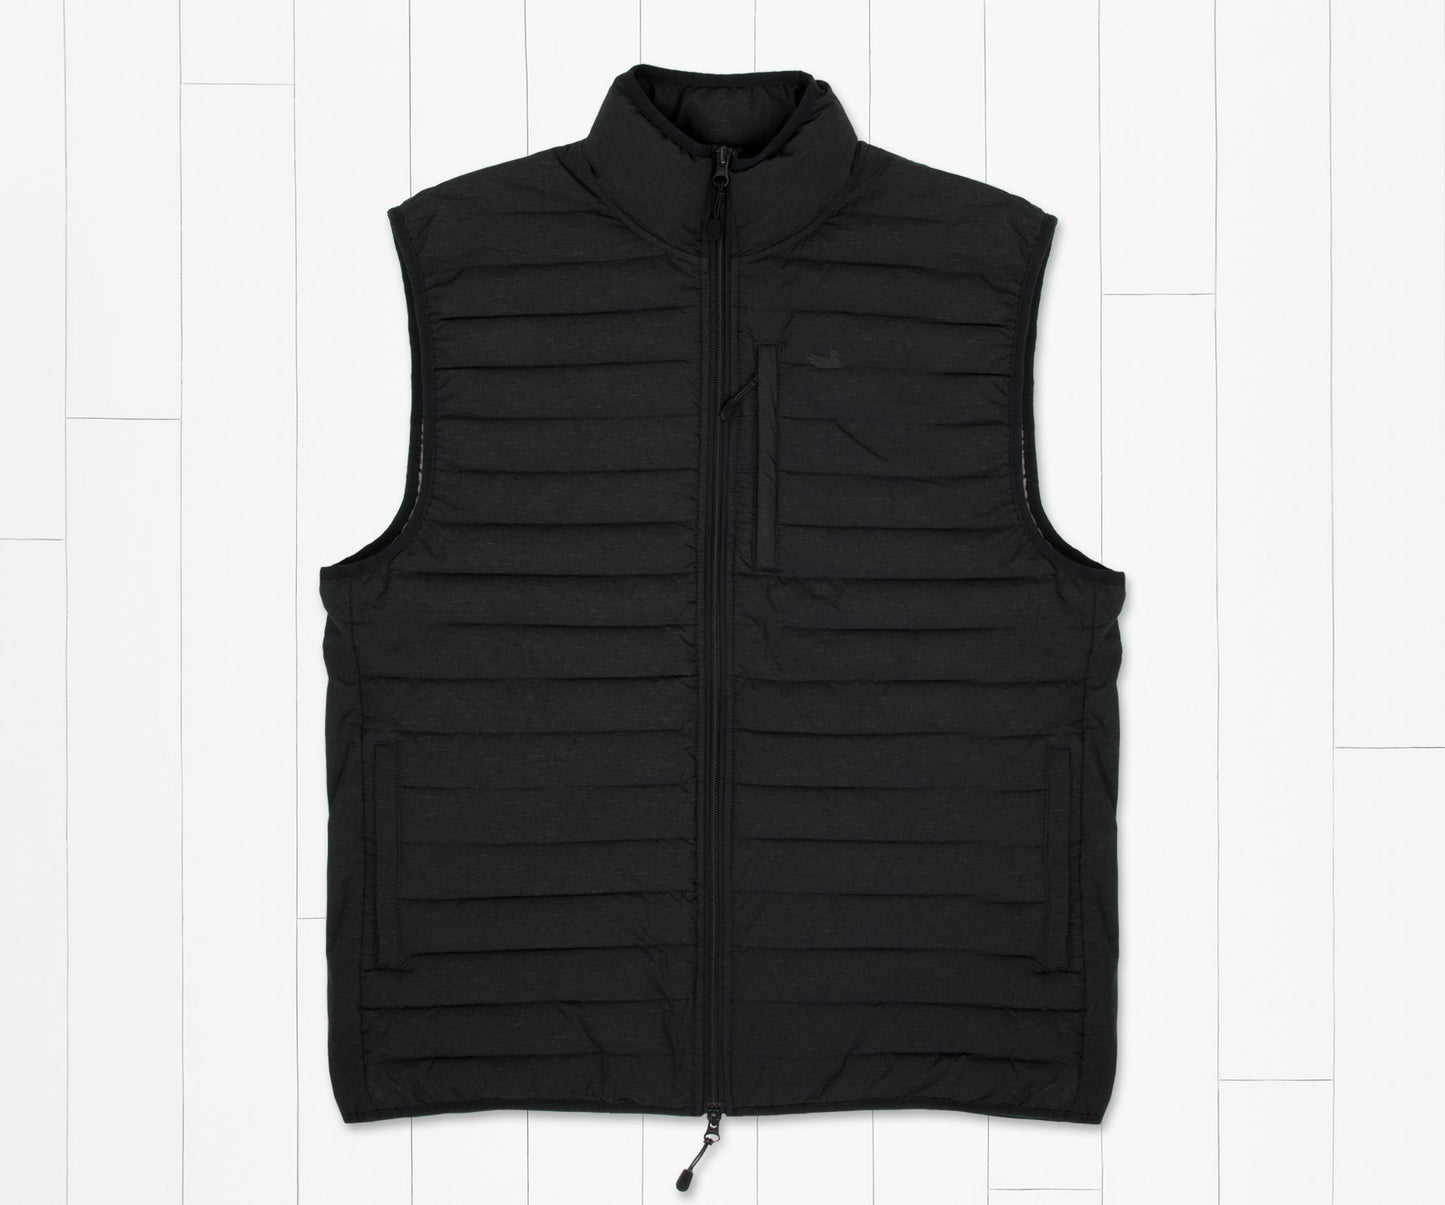 Southern Marsh Olympia Performance Fill Vest